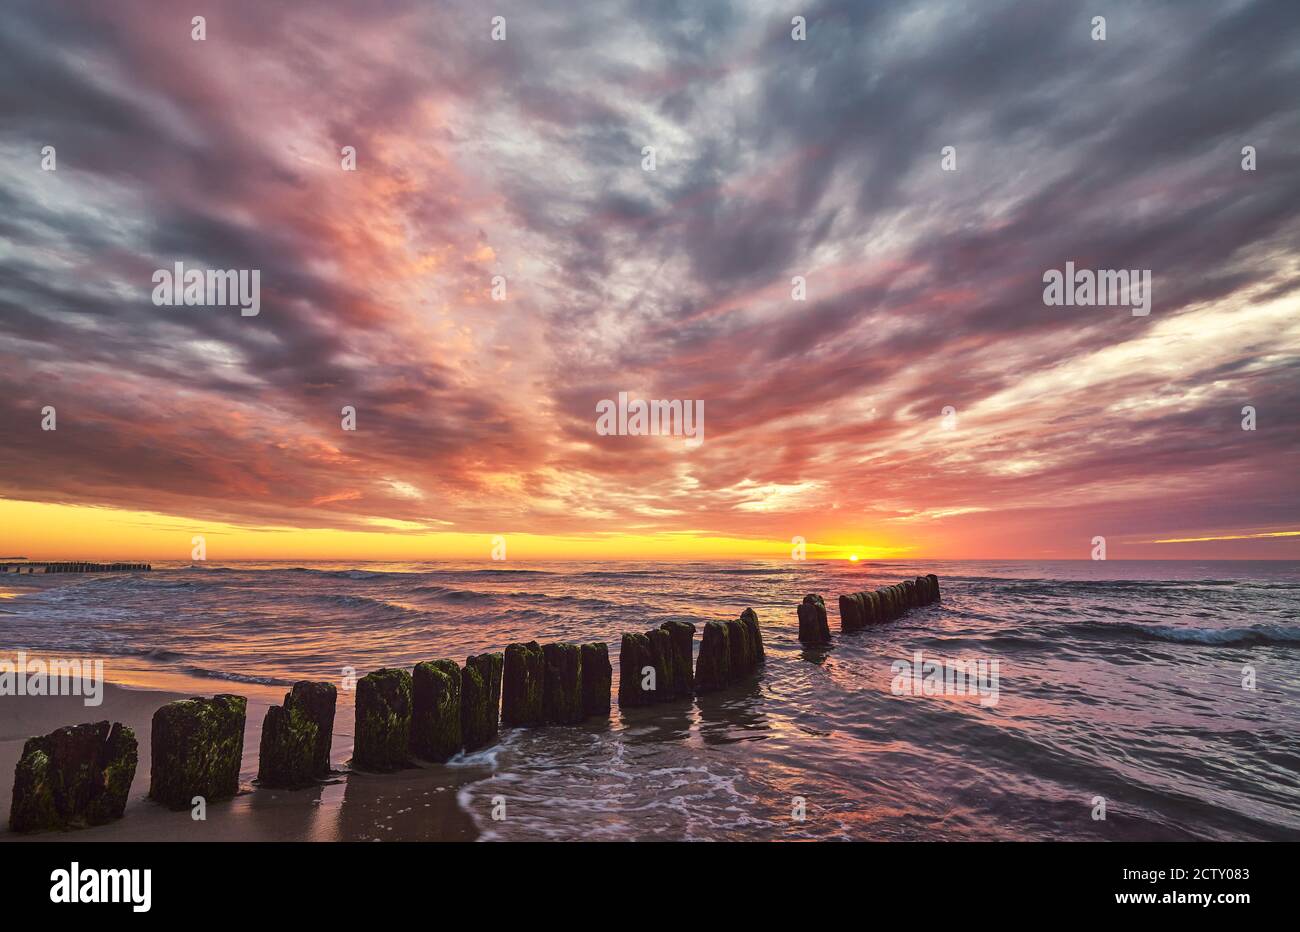 Scenic sunset over the sea with an old wooden breakwater. Stock Photo